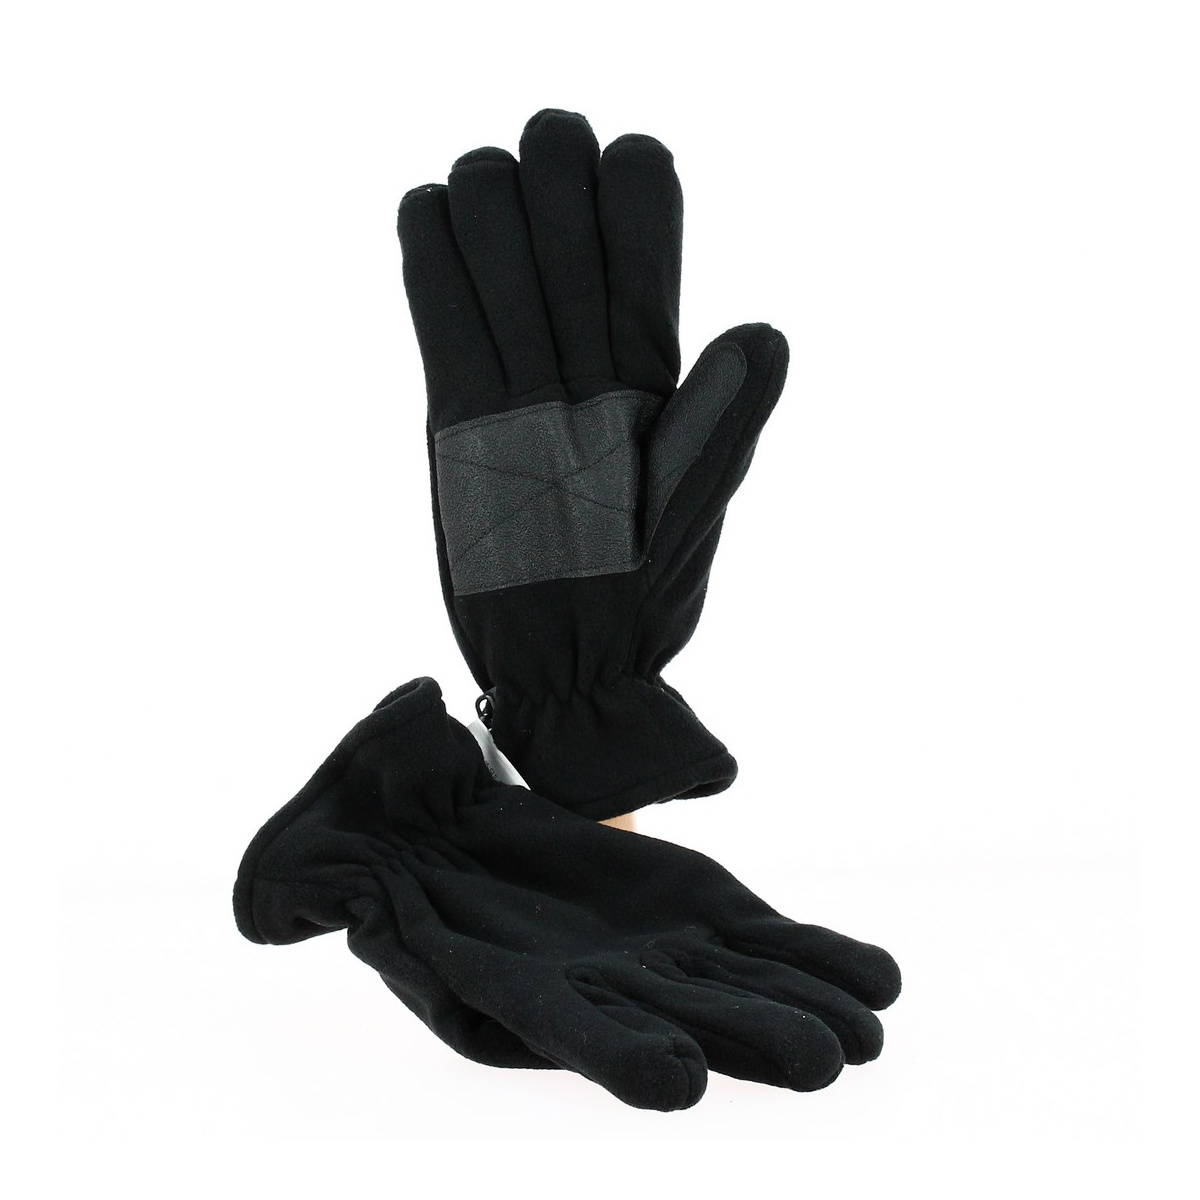 Gants polaire Noir - Traclet Reference : 18684